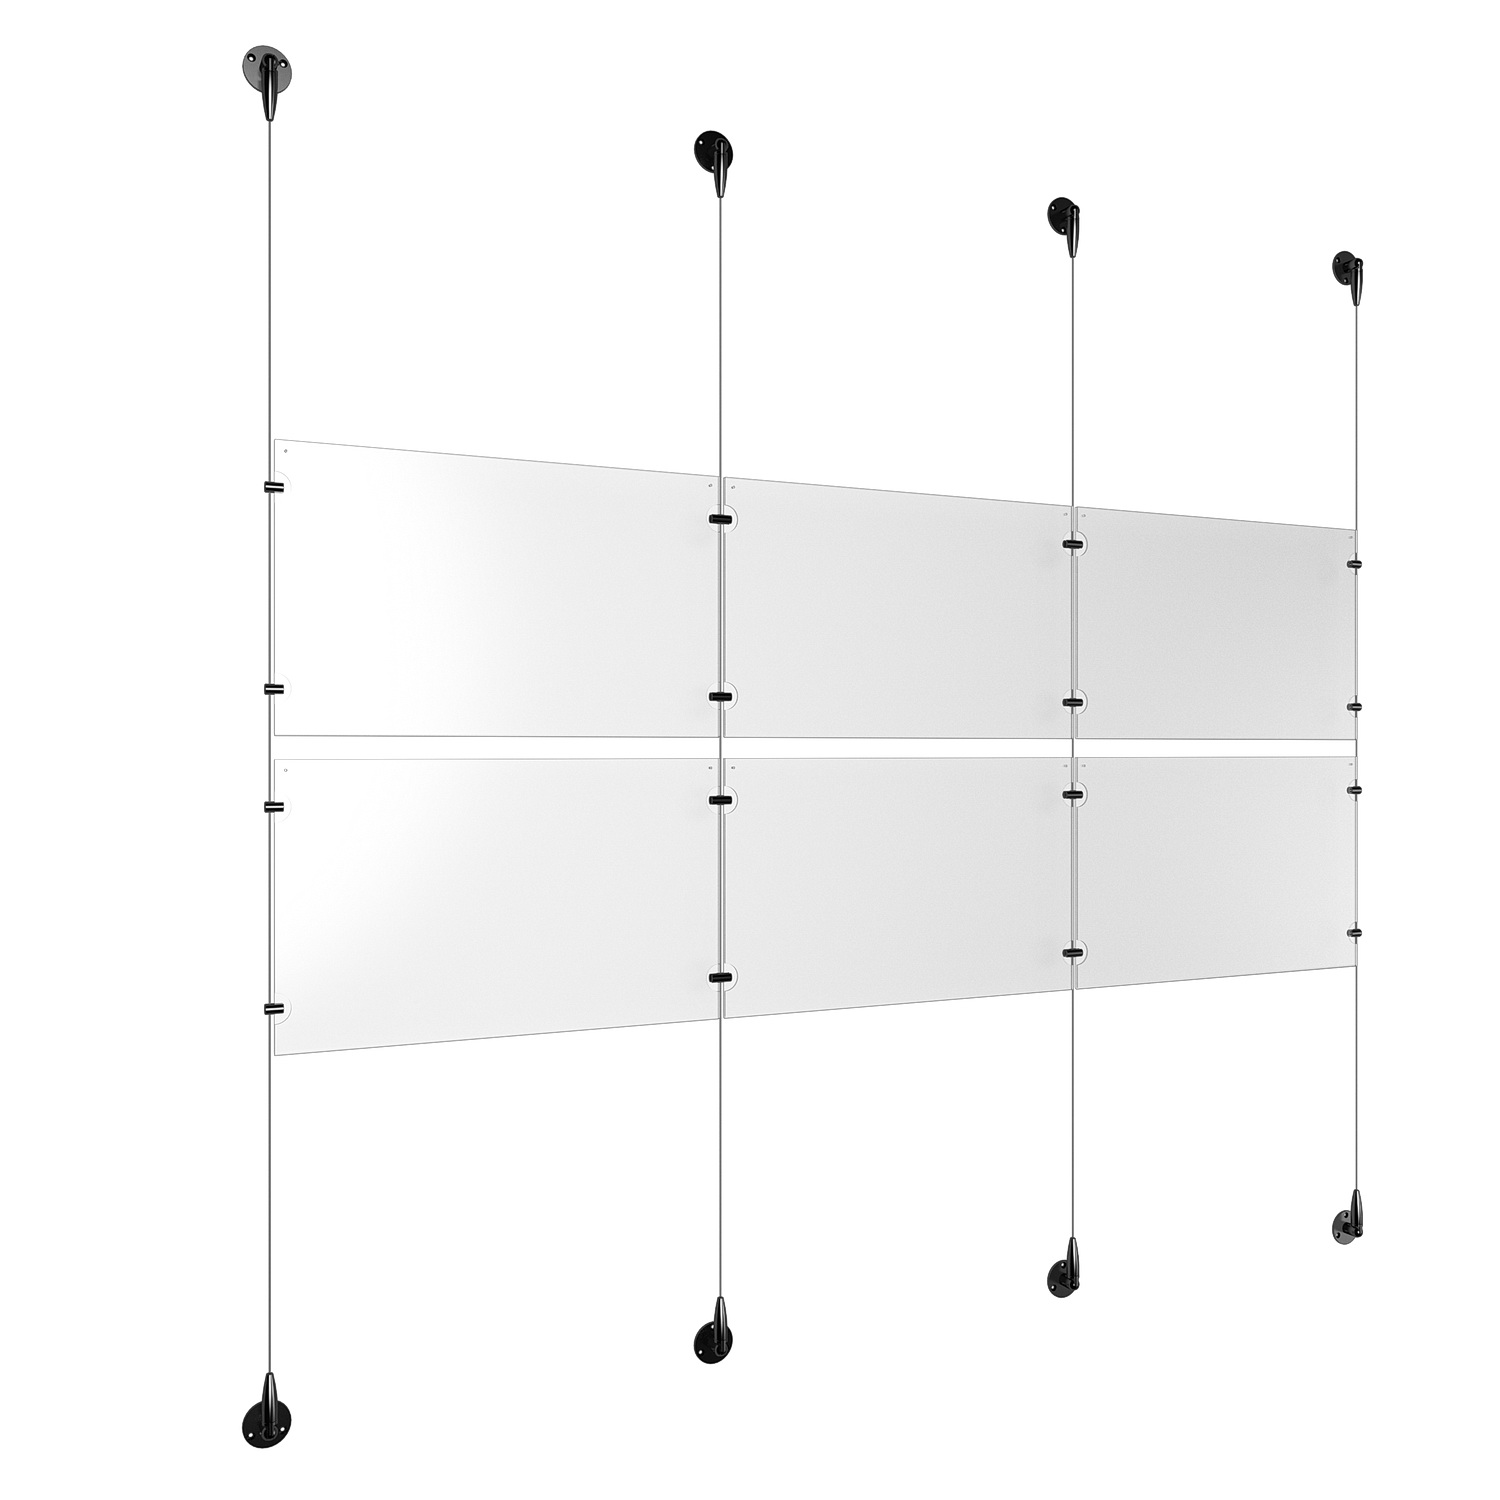 (6) 17'' Width x 11'' Height Clear Acrylic Frame & (4) Aluminum Matte Black Adjustable Angle Signature 1/8'' Diameter Cable Systems with (8) Single-Sided Panel Grippers (8) Double-Sided Panel Grippers